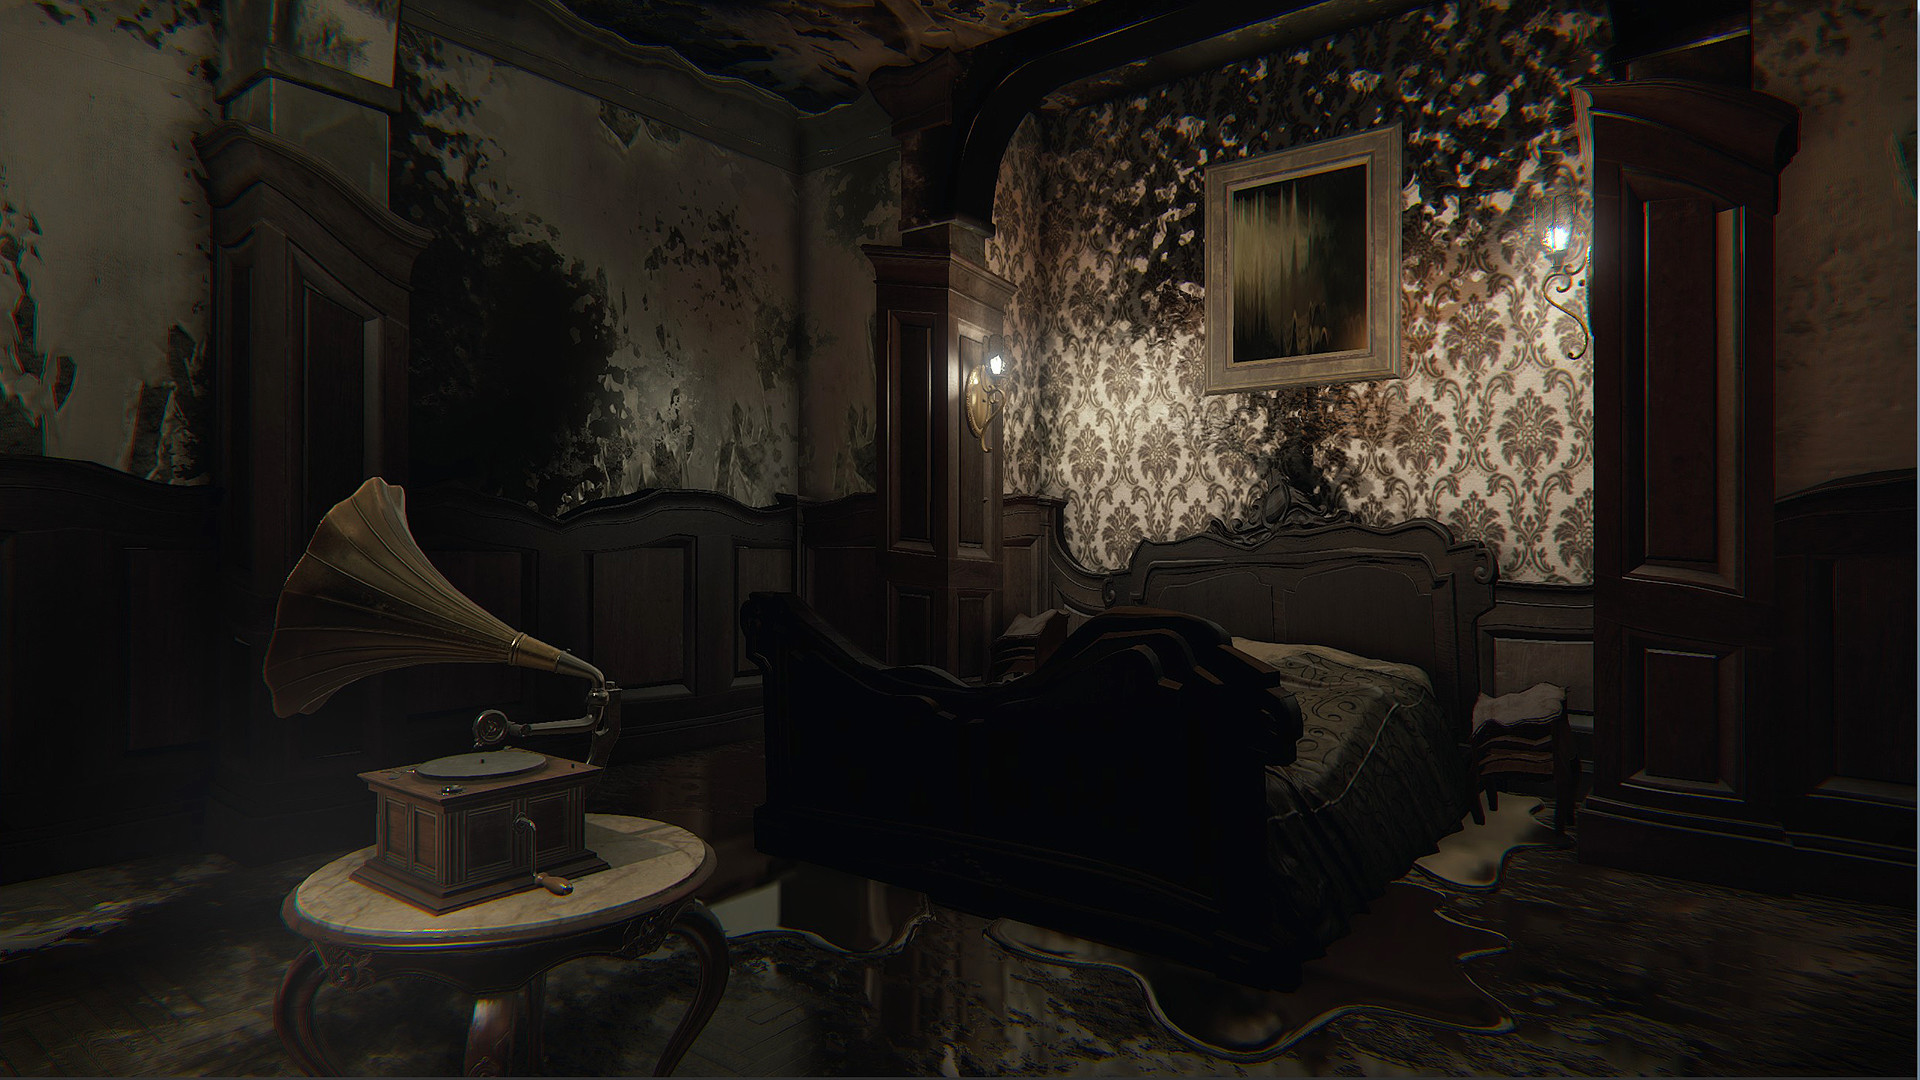 Prime Gaming is offering one of the best horror games for free this October